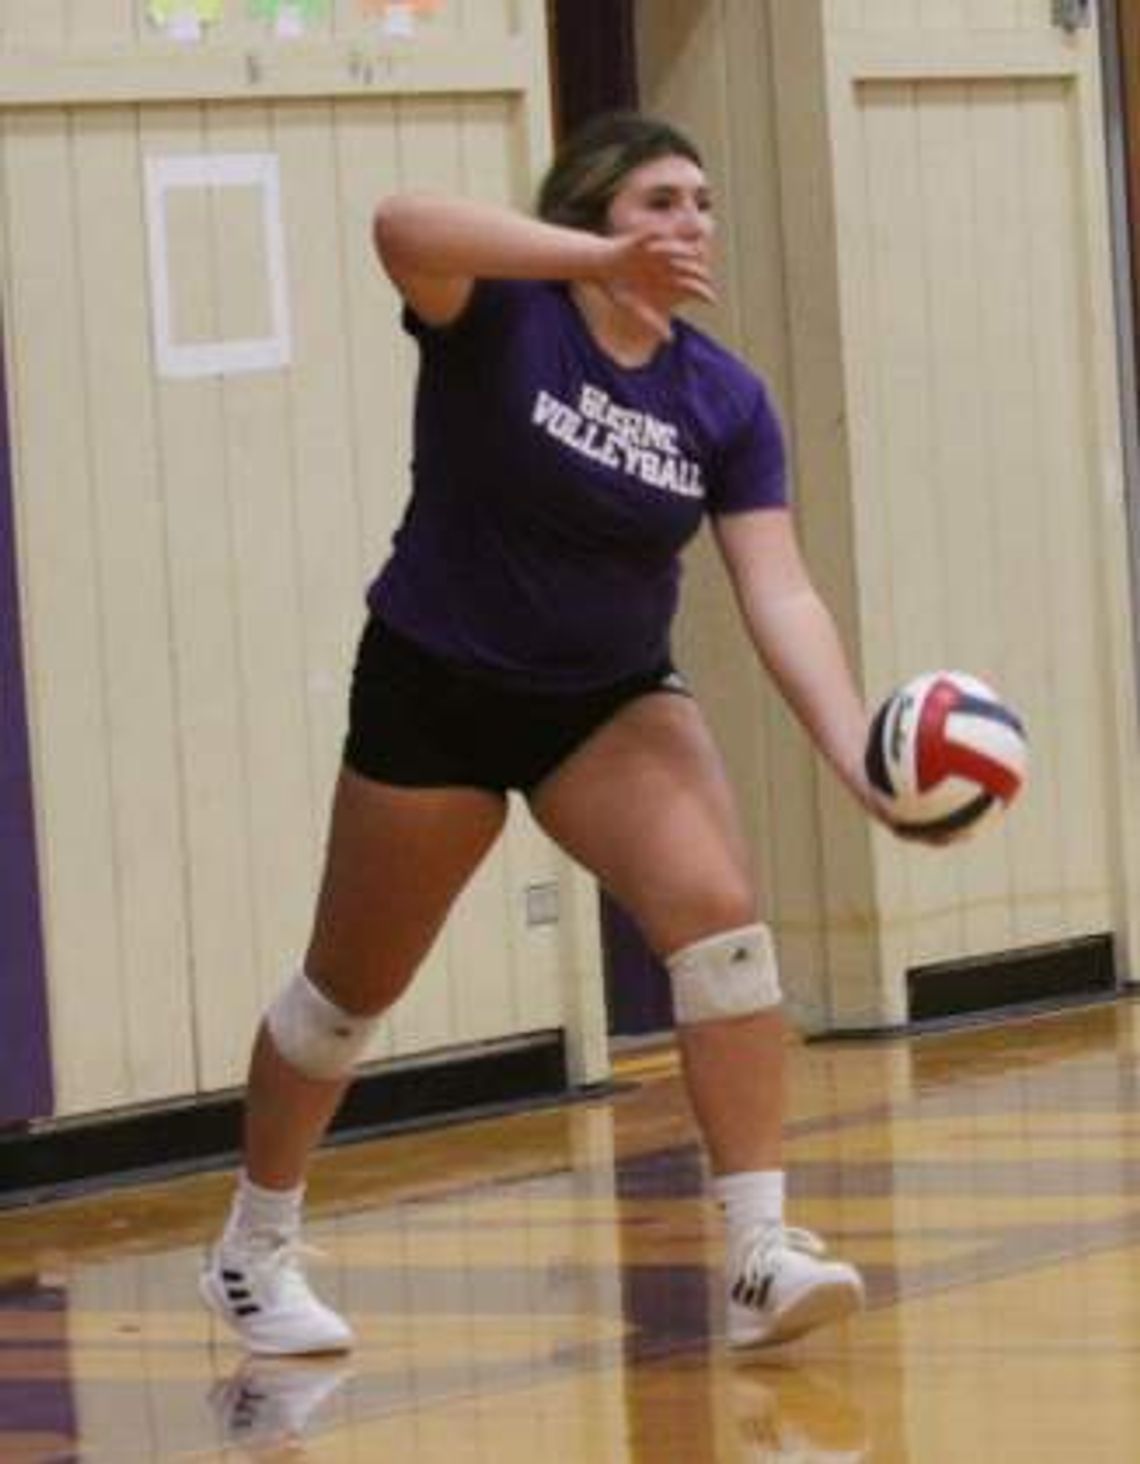 Volleyball season starts this week for area teams